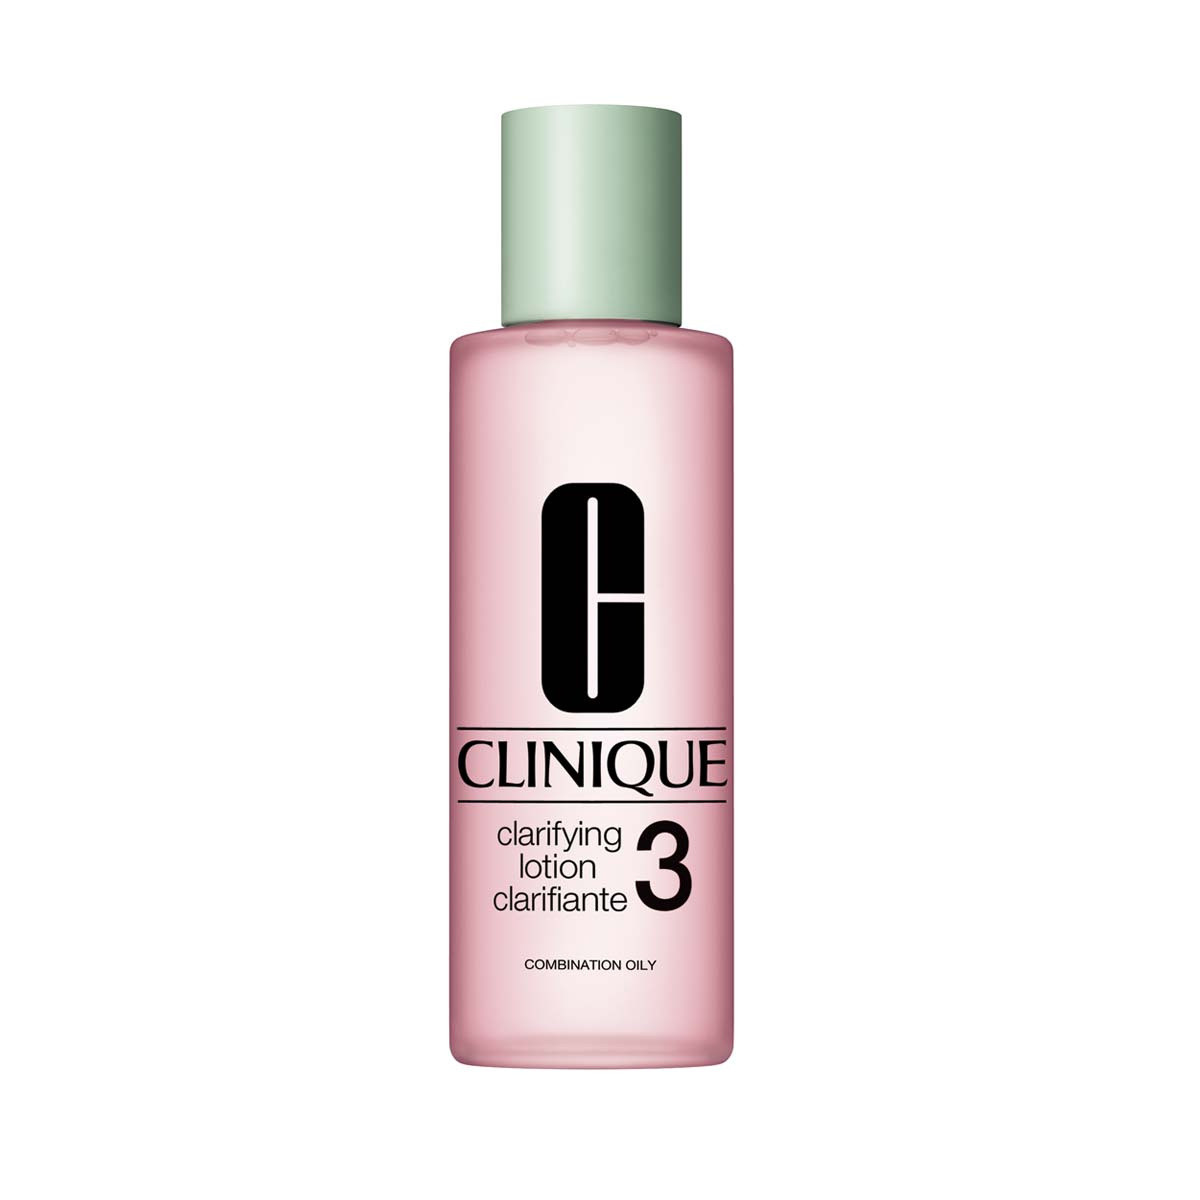 Clinique clarifying lotion 3 - 400 ml, Rosa, large image number 0